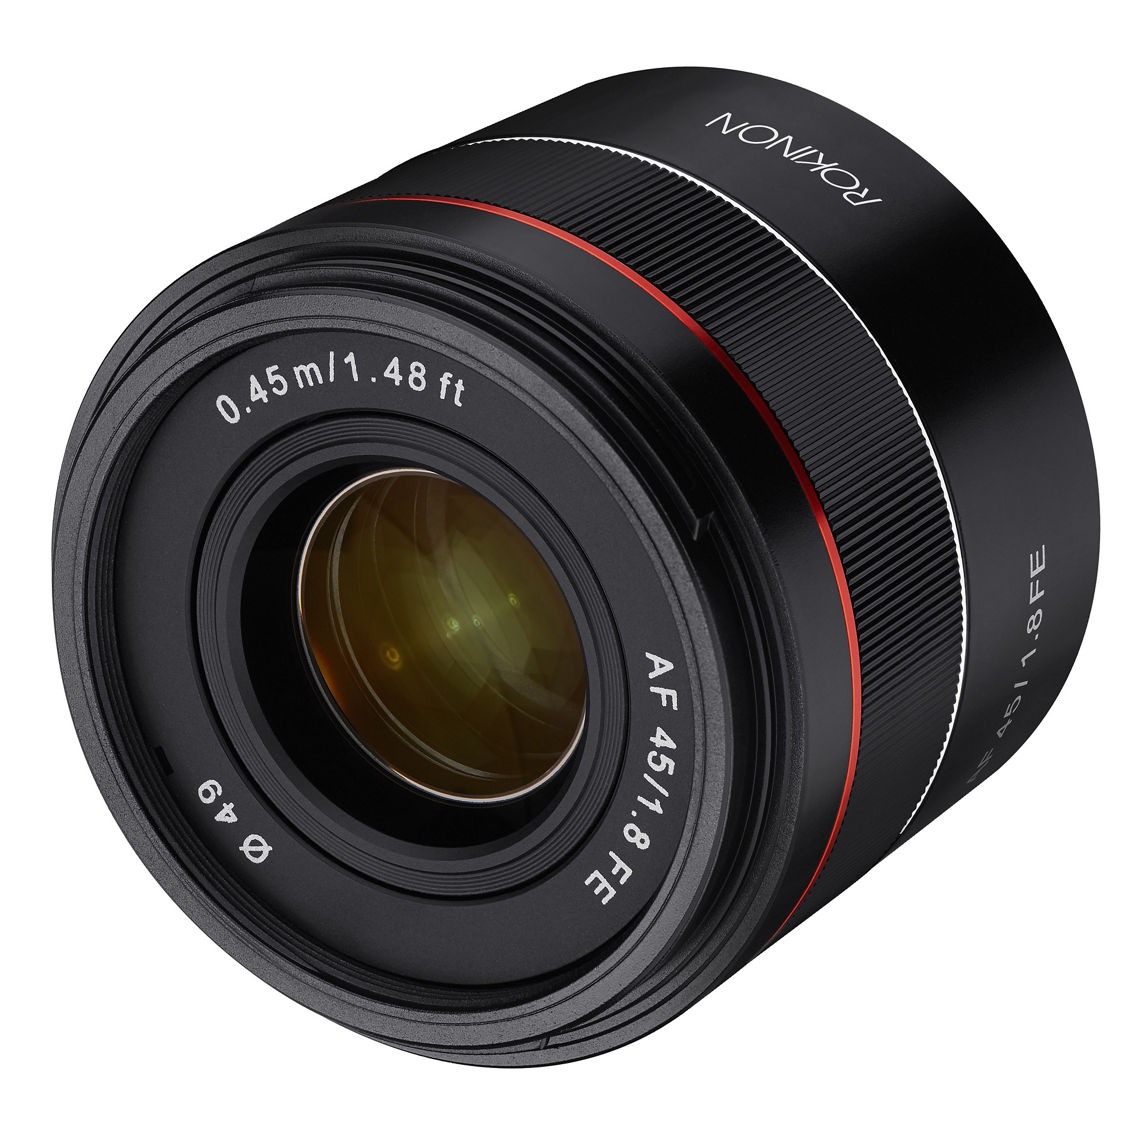 Rokinon 45mm F1.8 AF Full Frame Compact Lens for Sony E Mount - Image 4 of 5